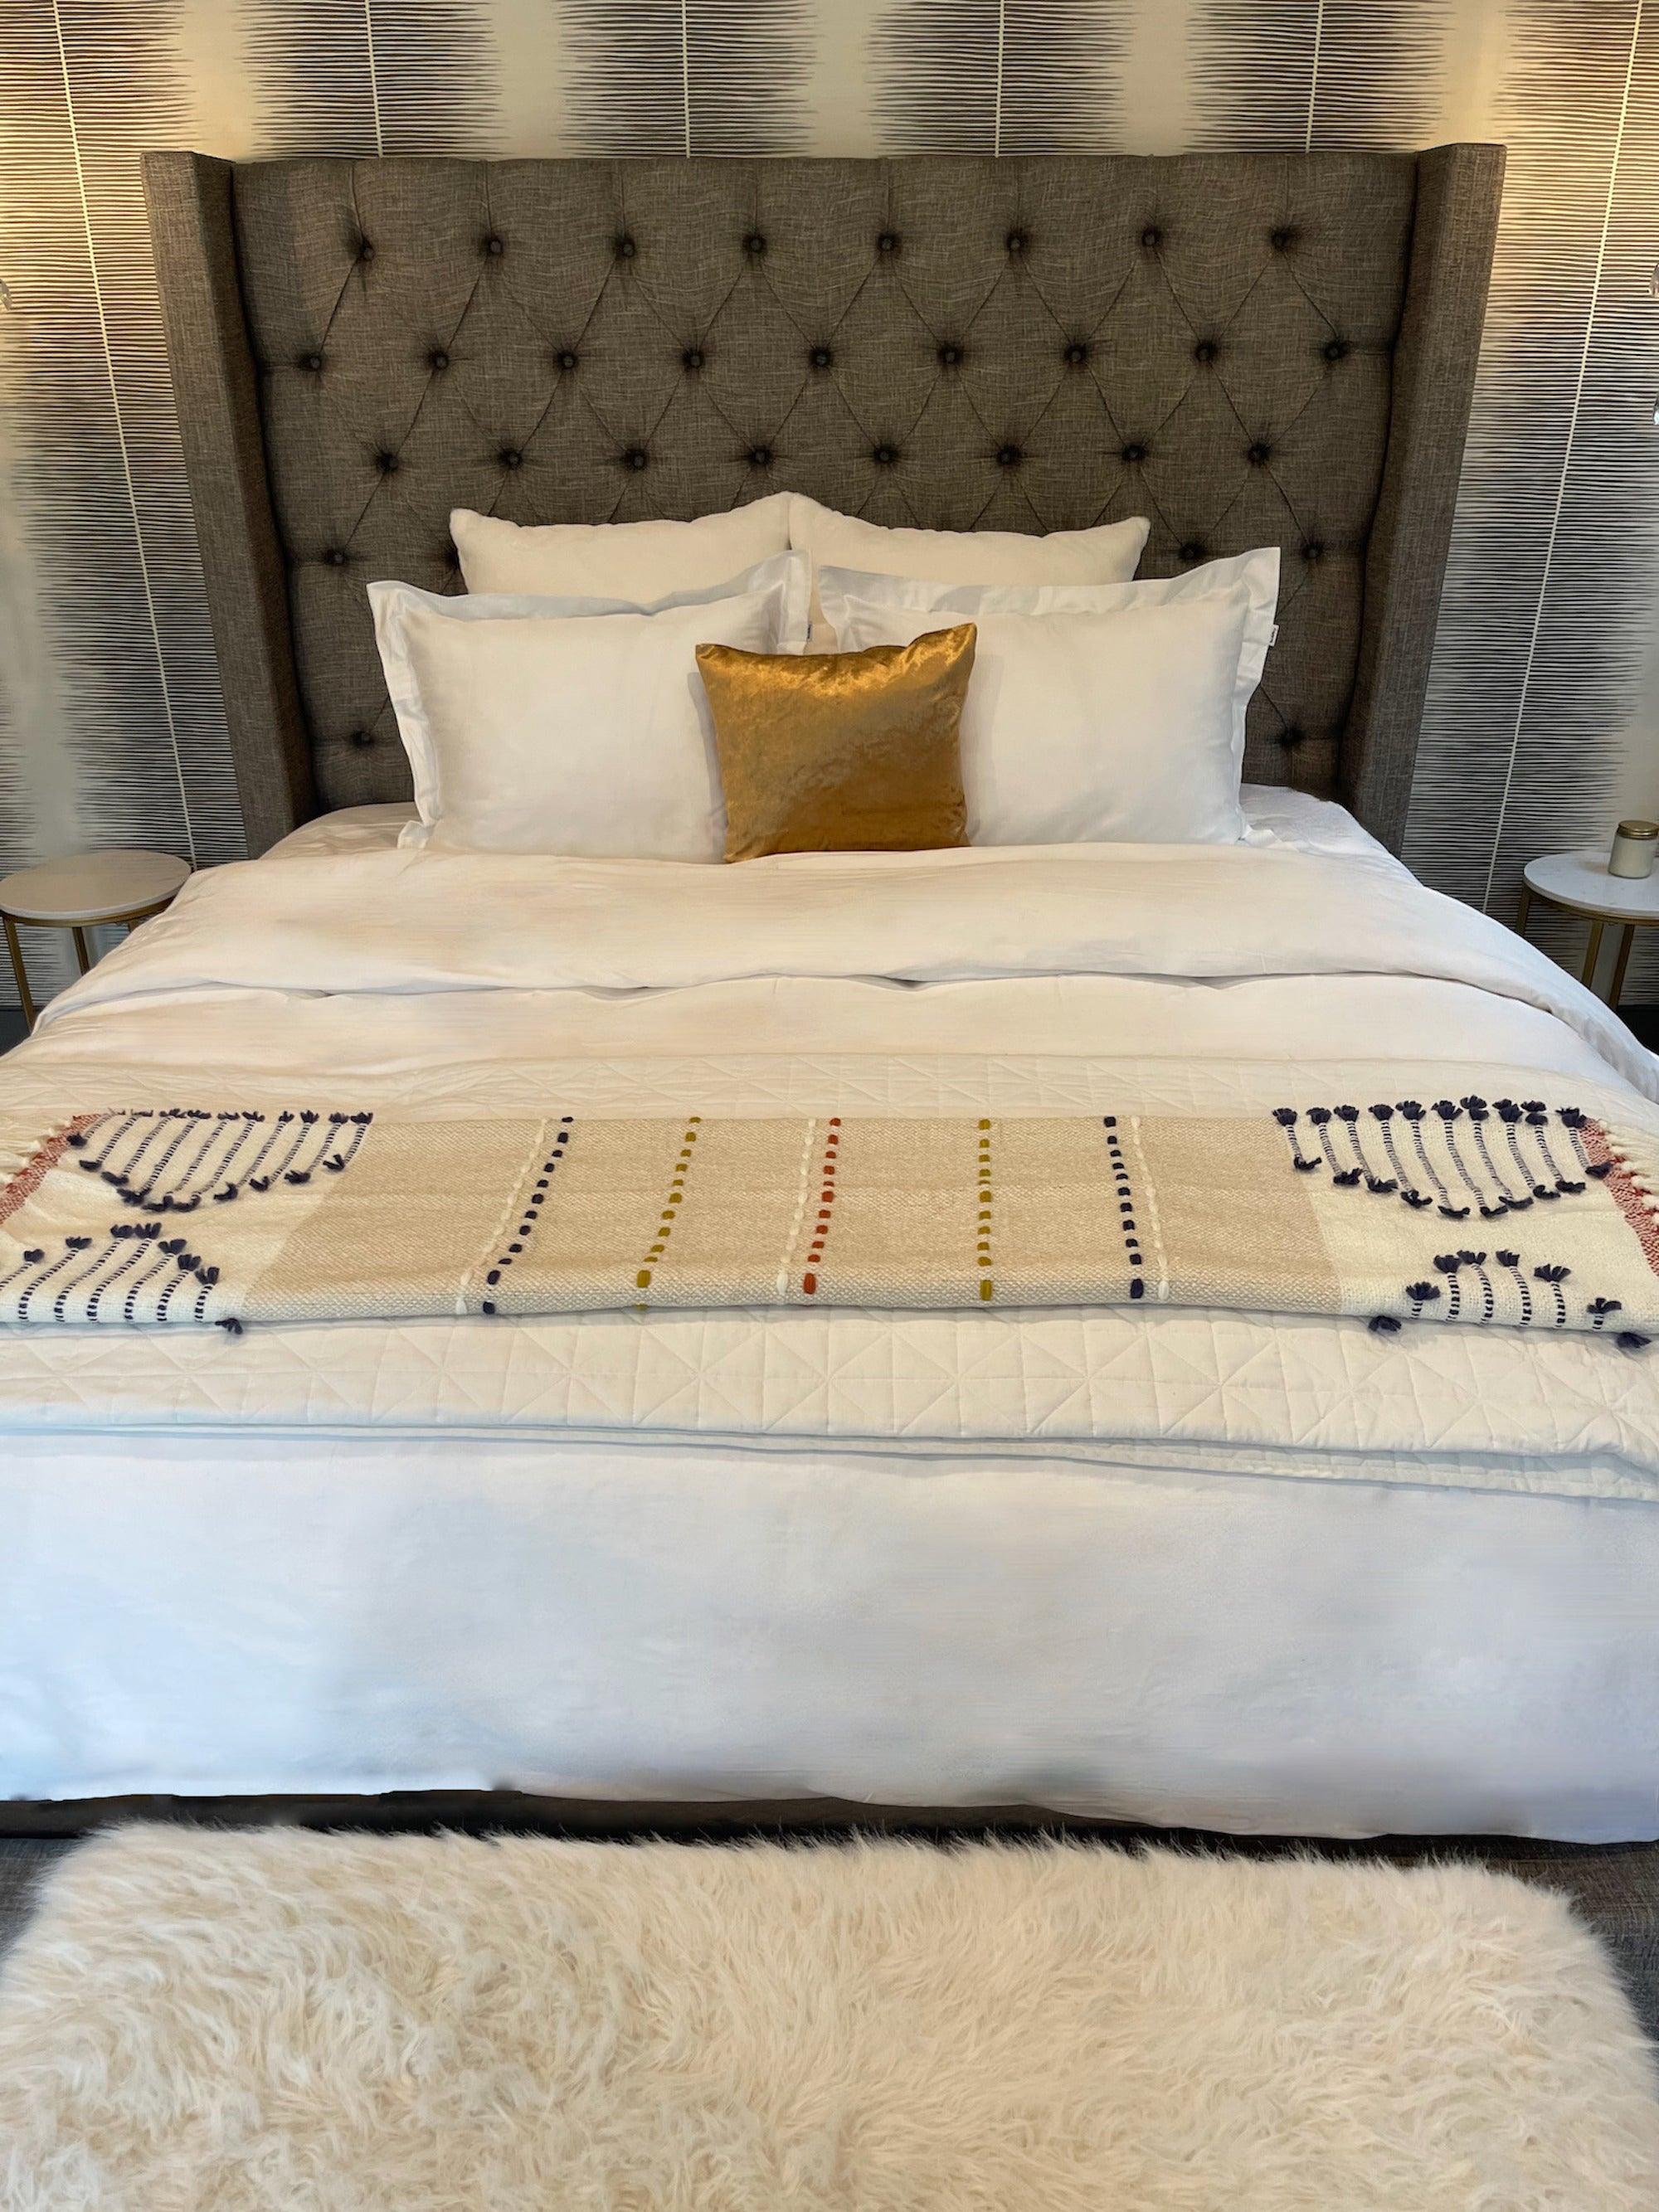 What Is a Duvet and How Is It Different From Other Bedding? - beddley.com